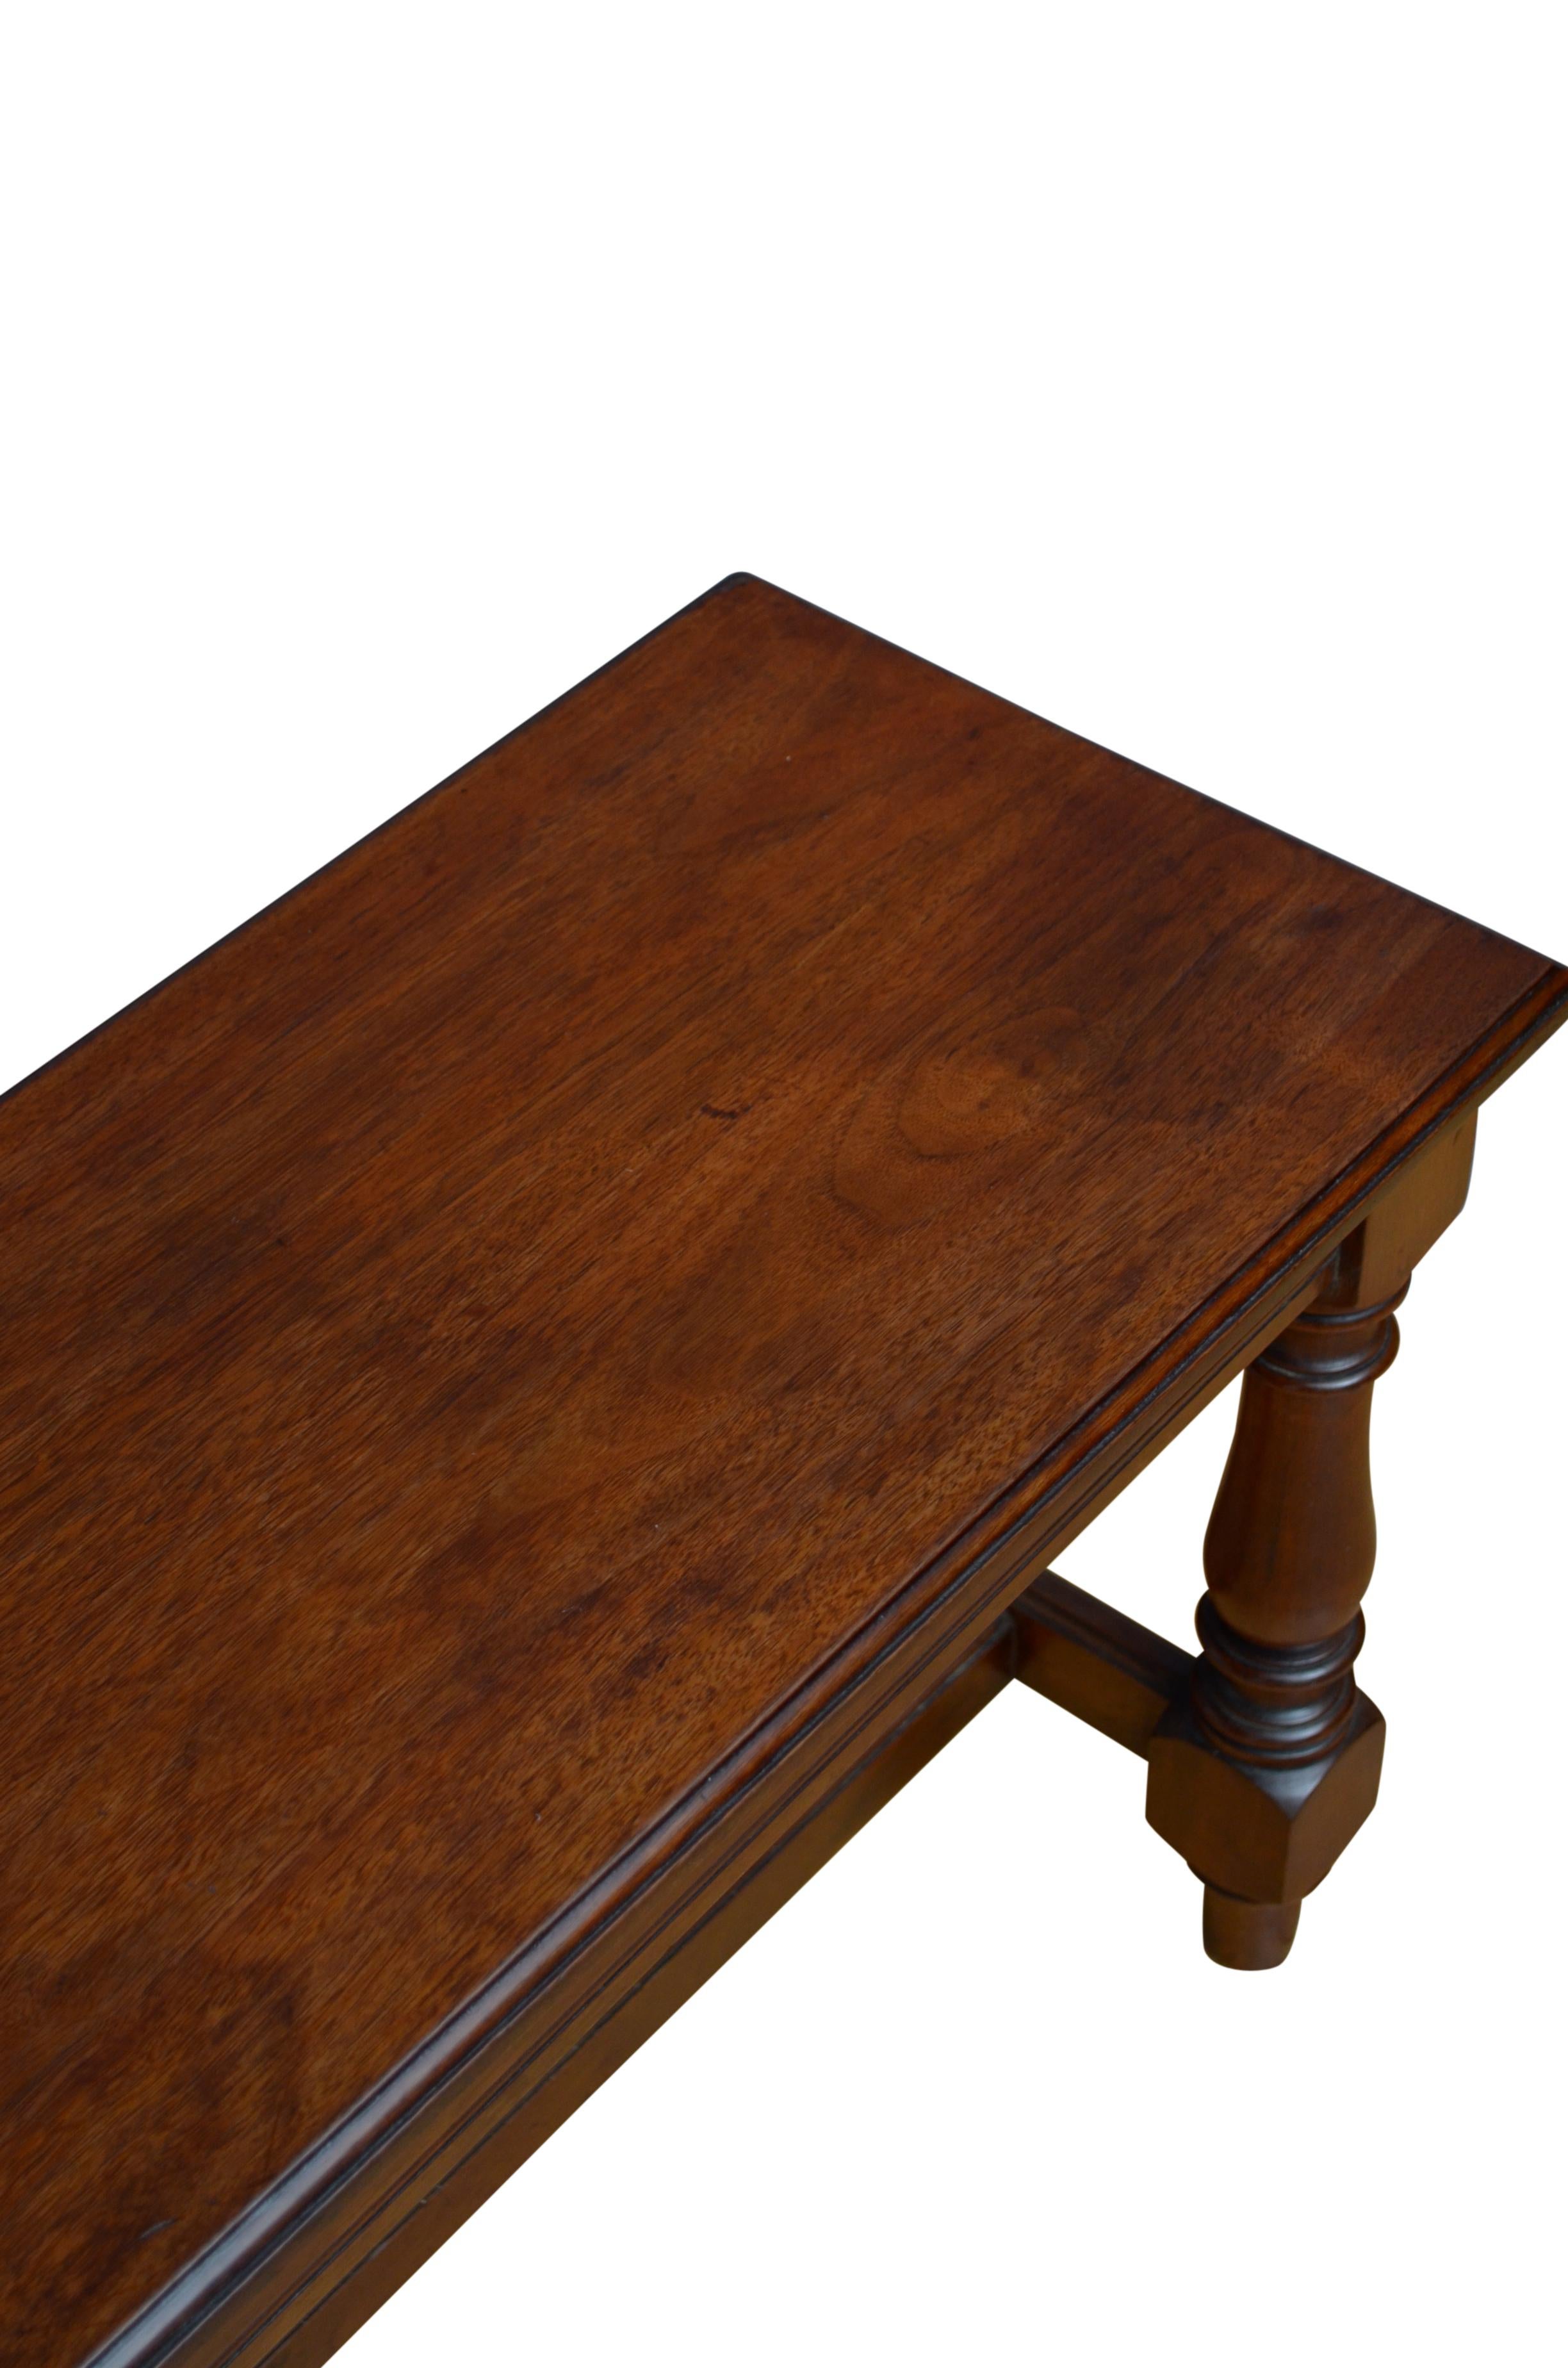 Victorian solid Walnut Hall Bench In Good Condition For Sale In Whaley Bridge, GB